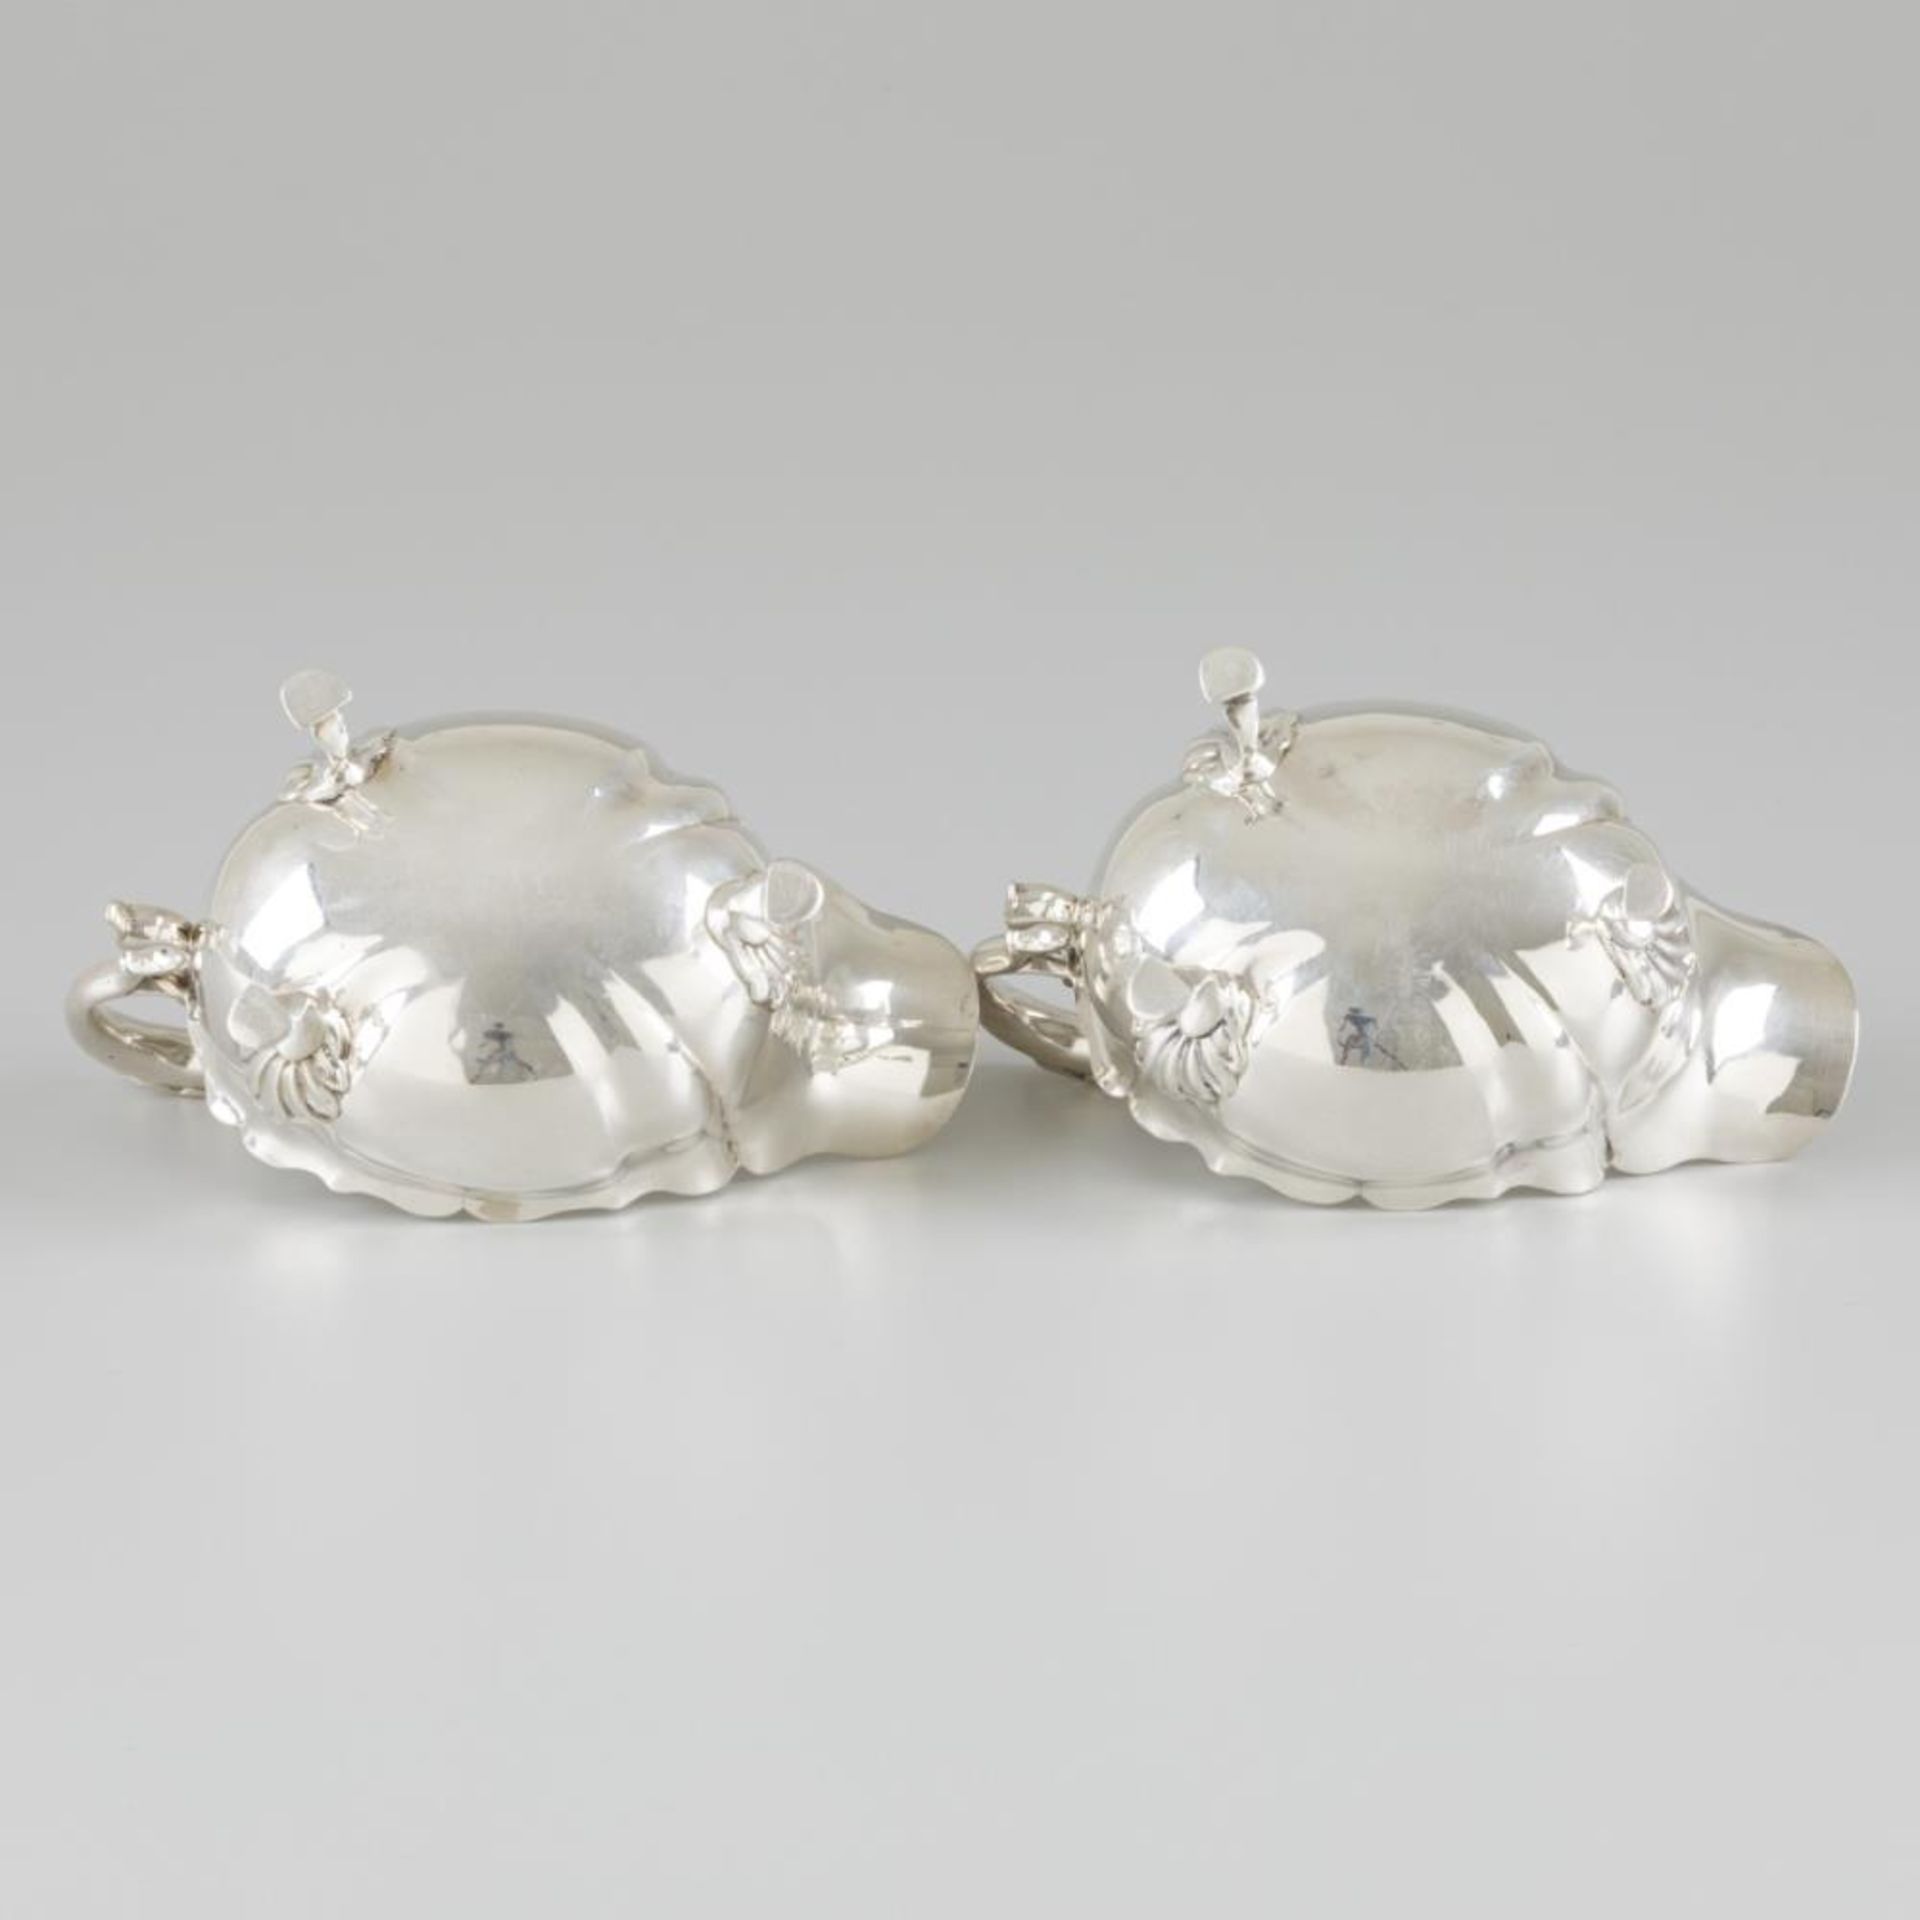 2-piece set of sauce boats silver. - Image 6 of 8